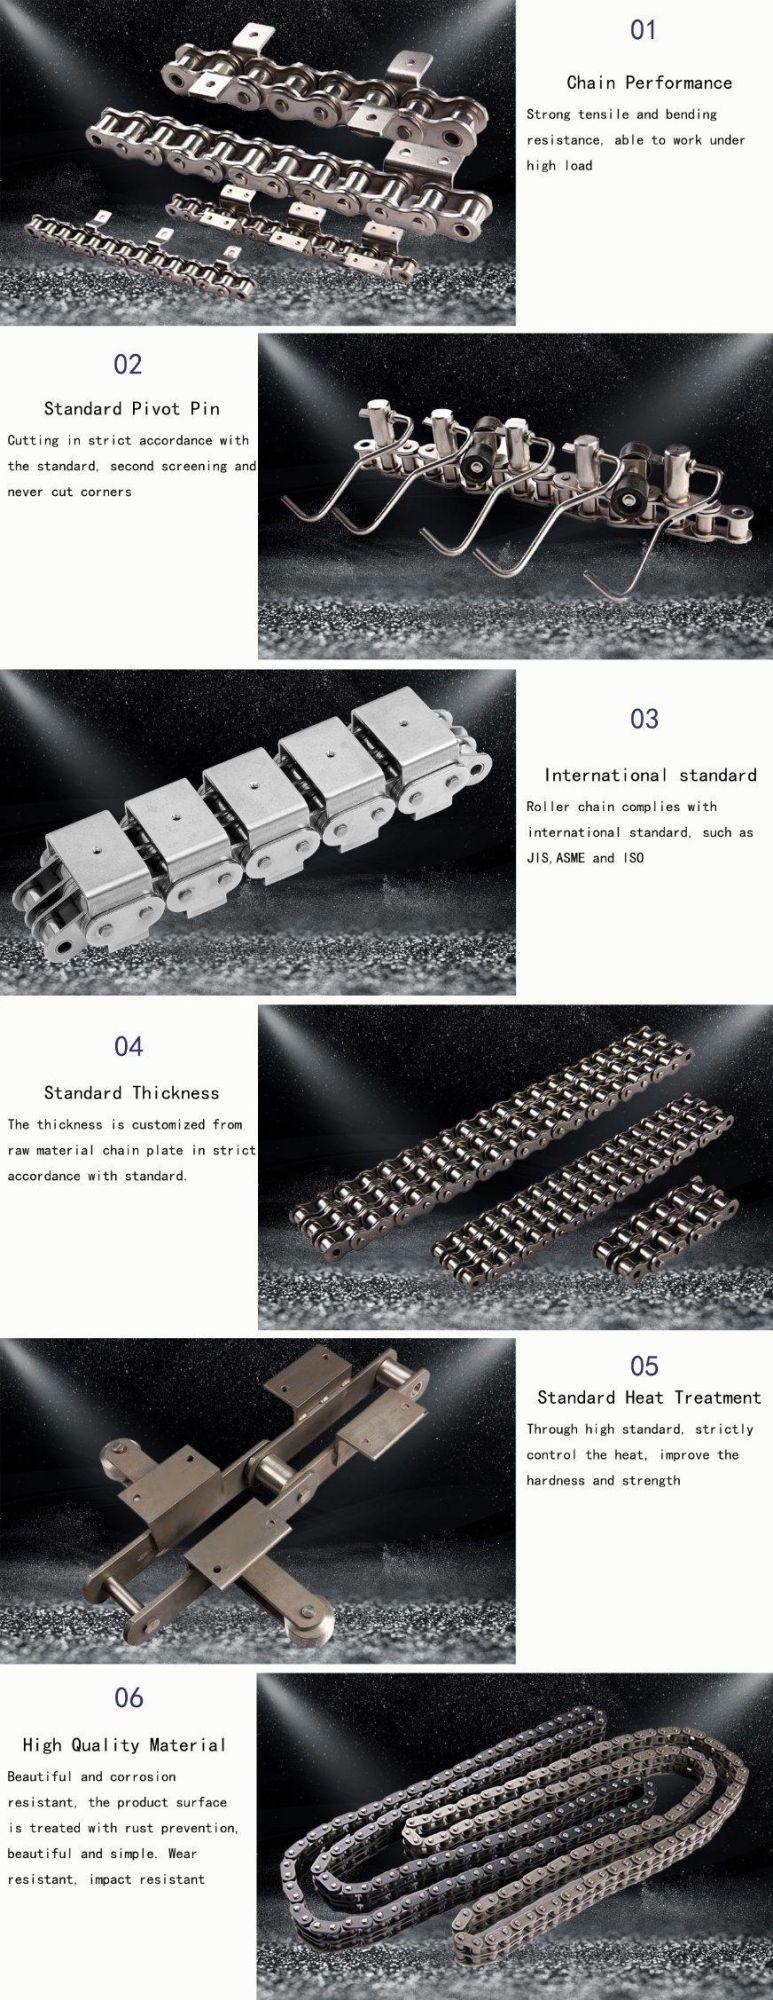 C2080 C2082 Stainless Steel High Temperature Resistant Industrial Chain Double Pitch Conveyor Chain